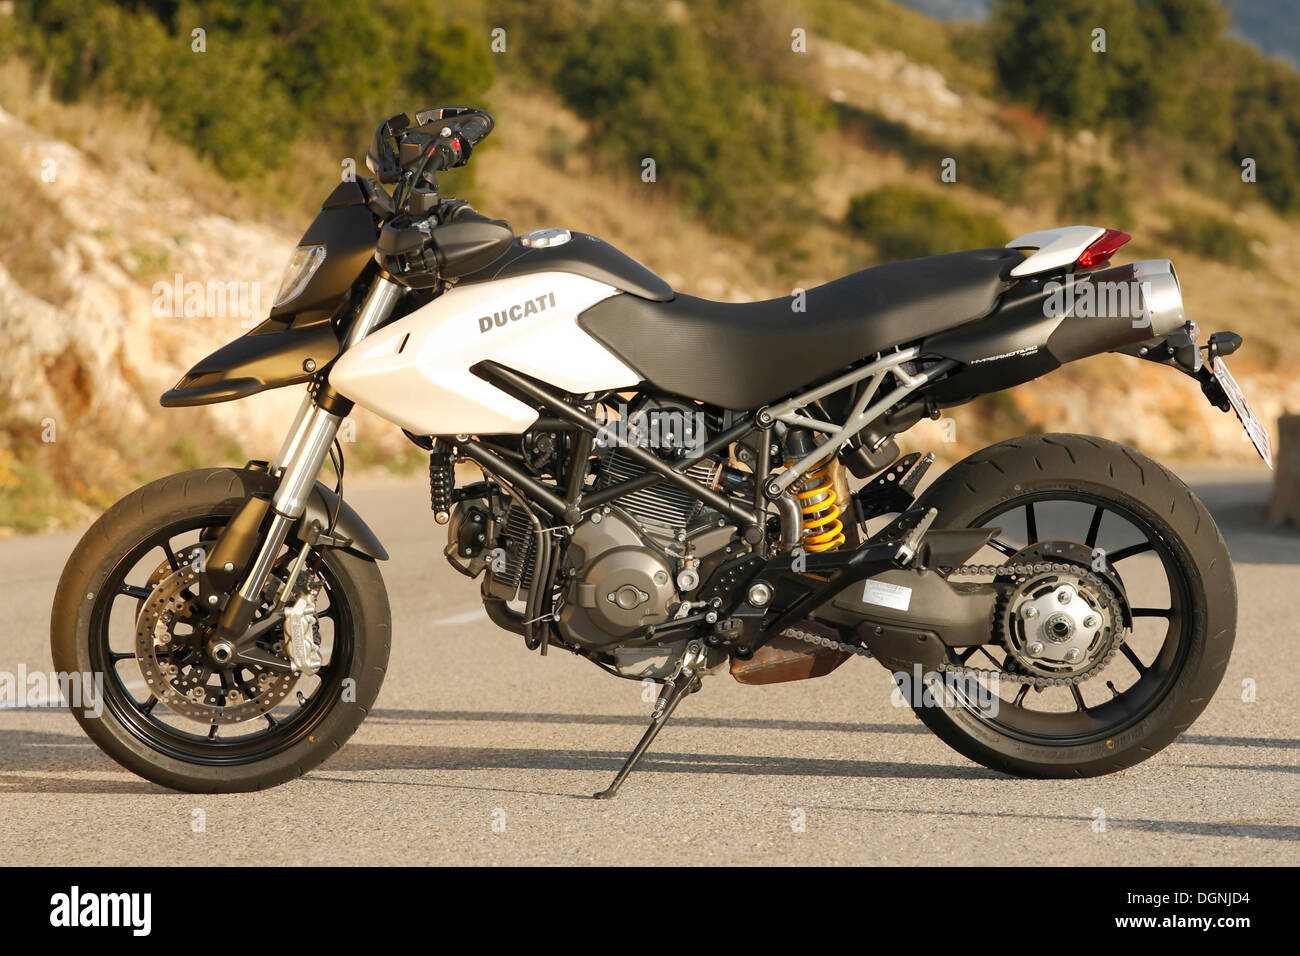 Ducati Hypermotard 796 Motorcycle Picture Gallery  Bikes4Sale